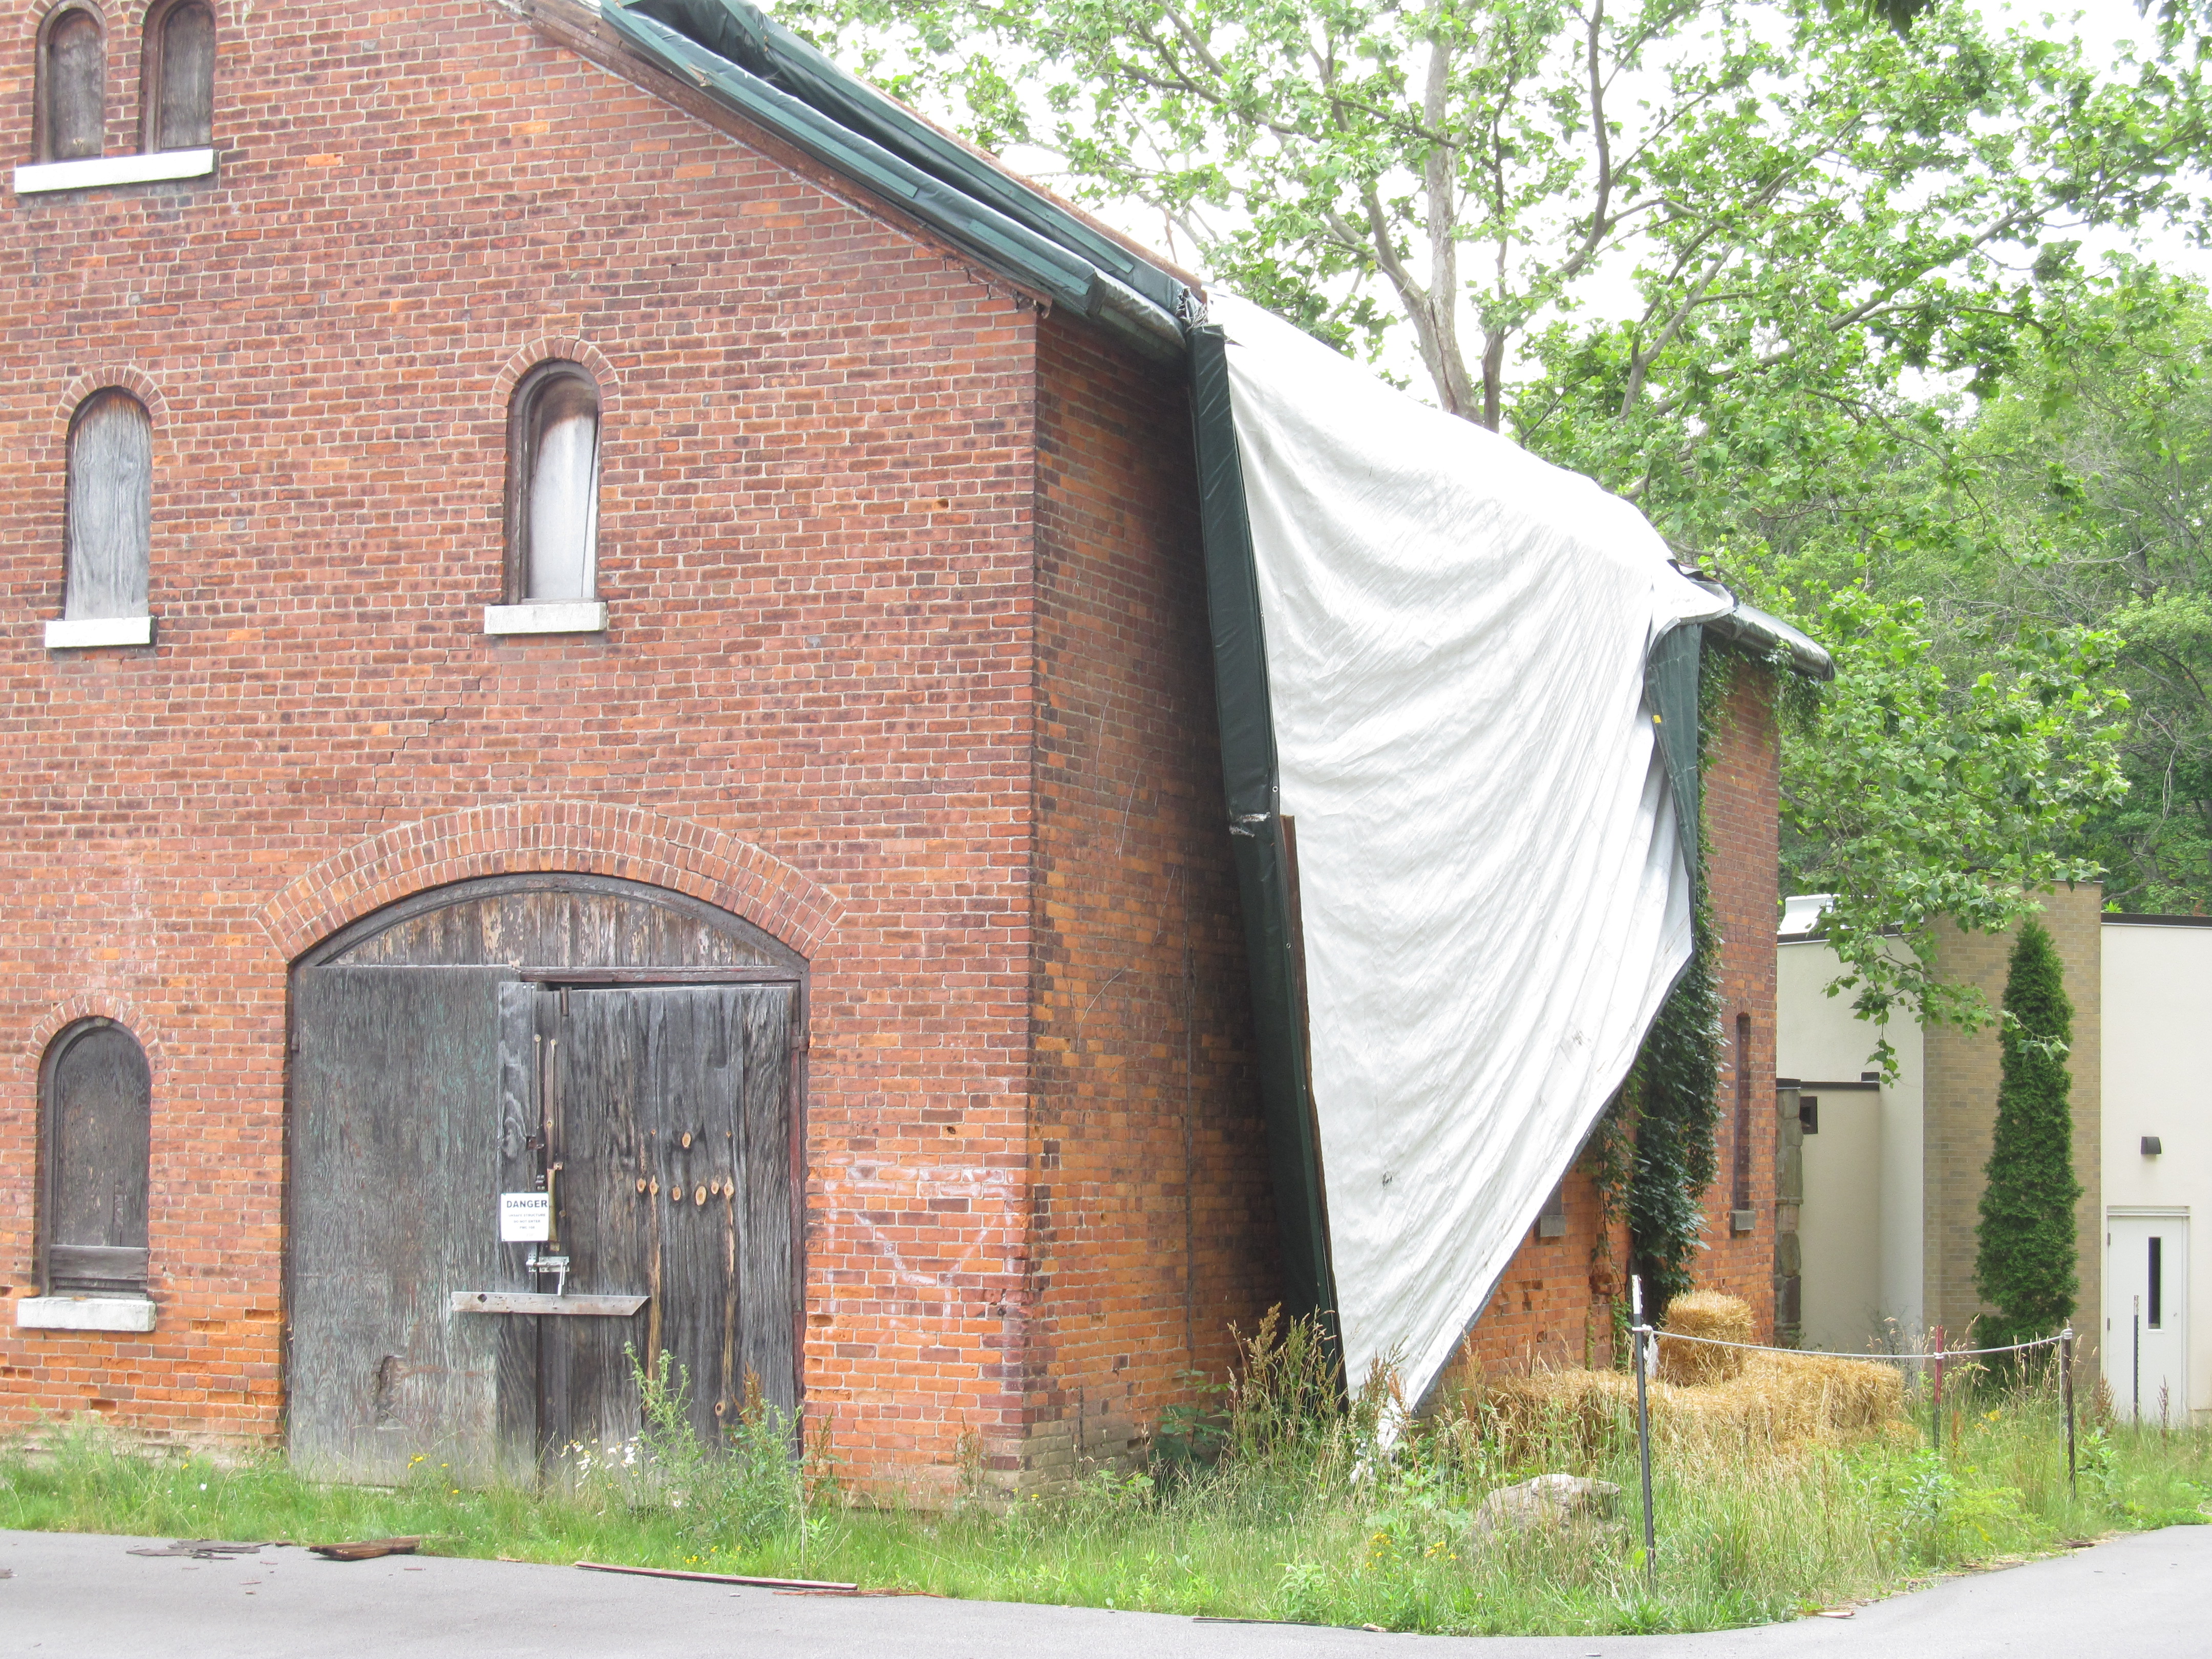 State Parks neglects DeVeaux Carriage Barn